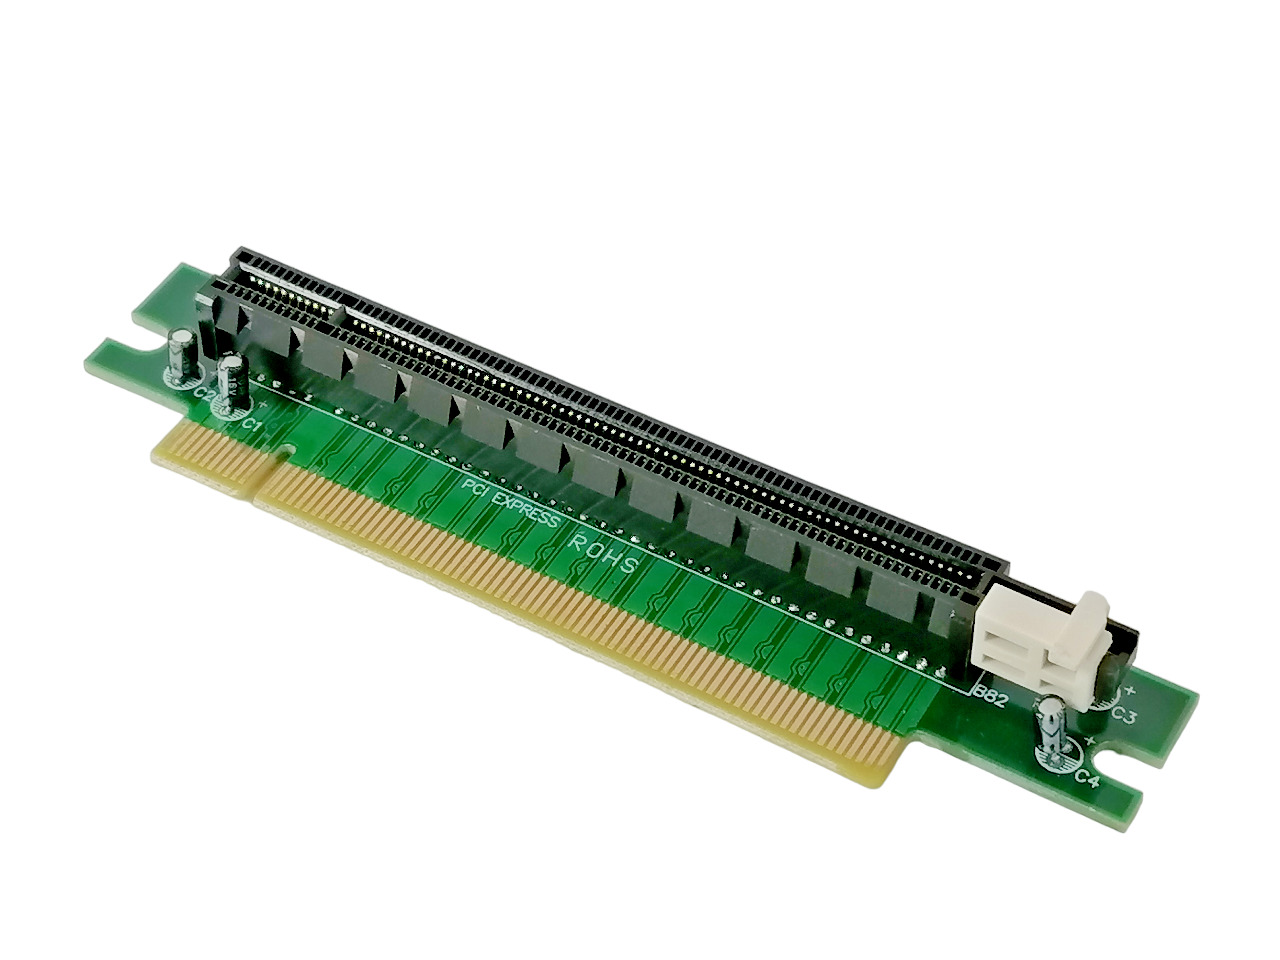 PCI-E Express 16X 90 Degree Adapter Riser Card for 1U Computer Server Chassis